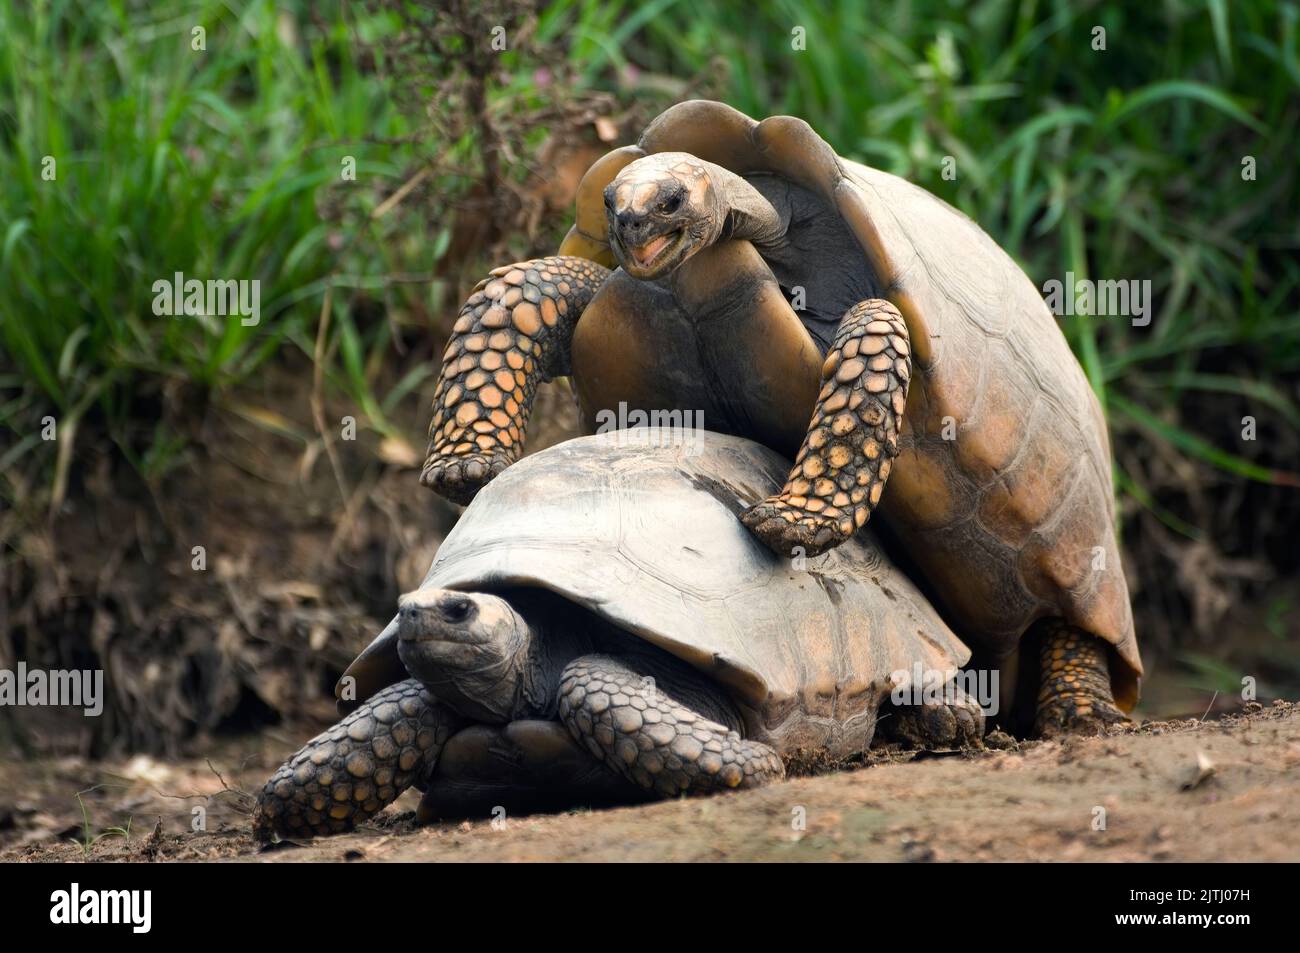 Red Footed Tortoise (Geochelone carbonaria), Pantanal, Mato Grosso, Brazil Stock Photo